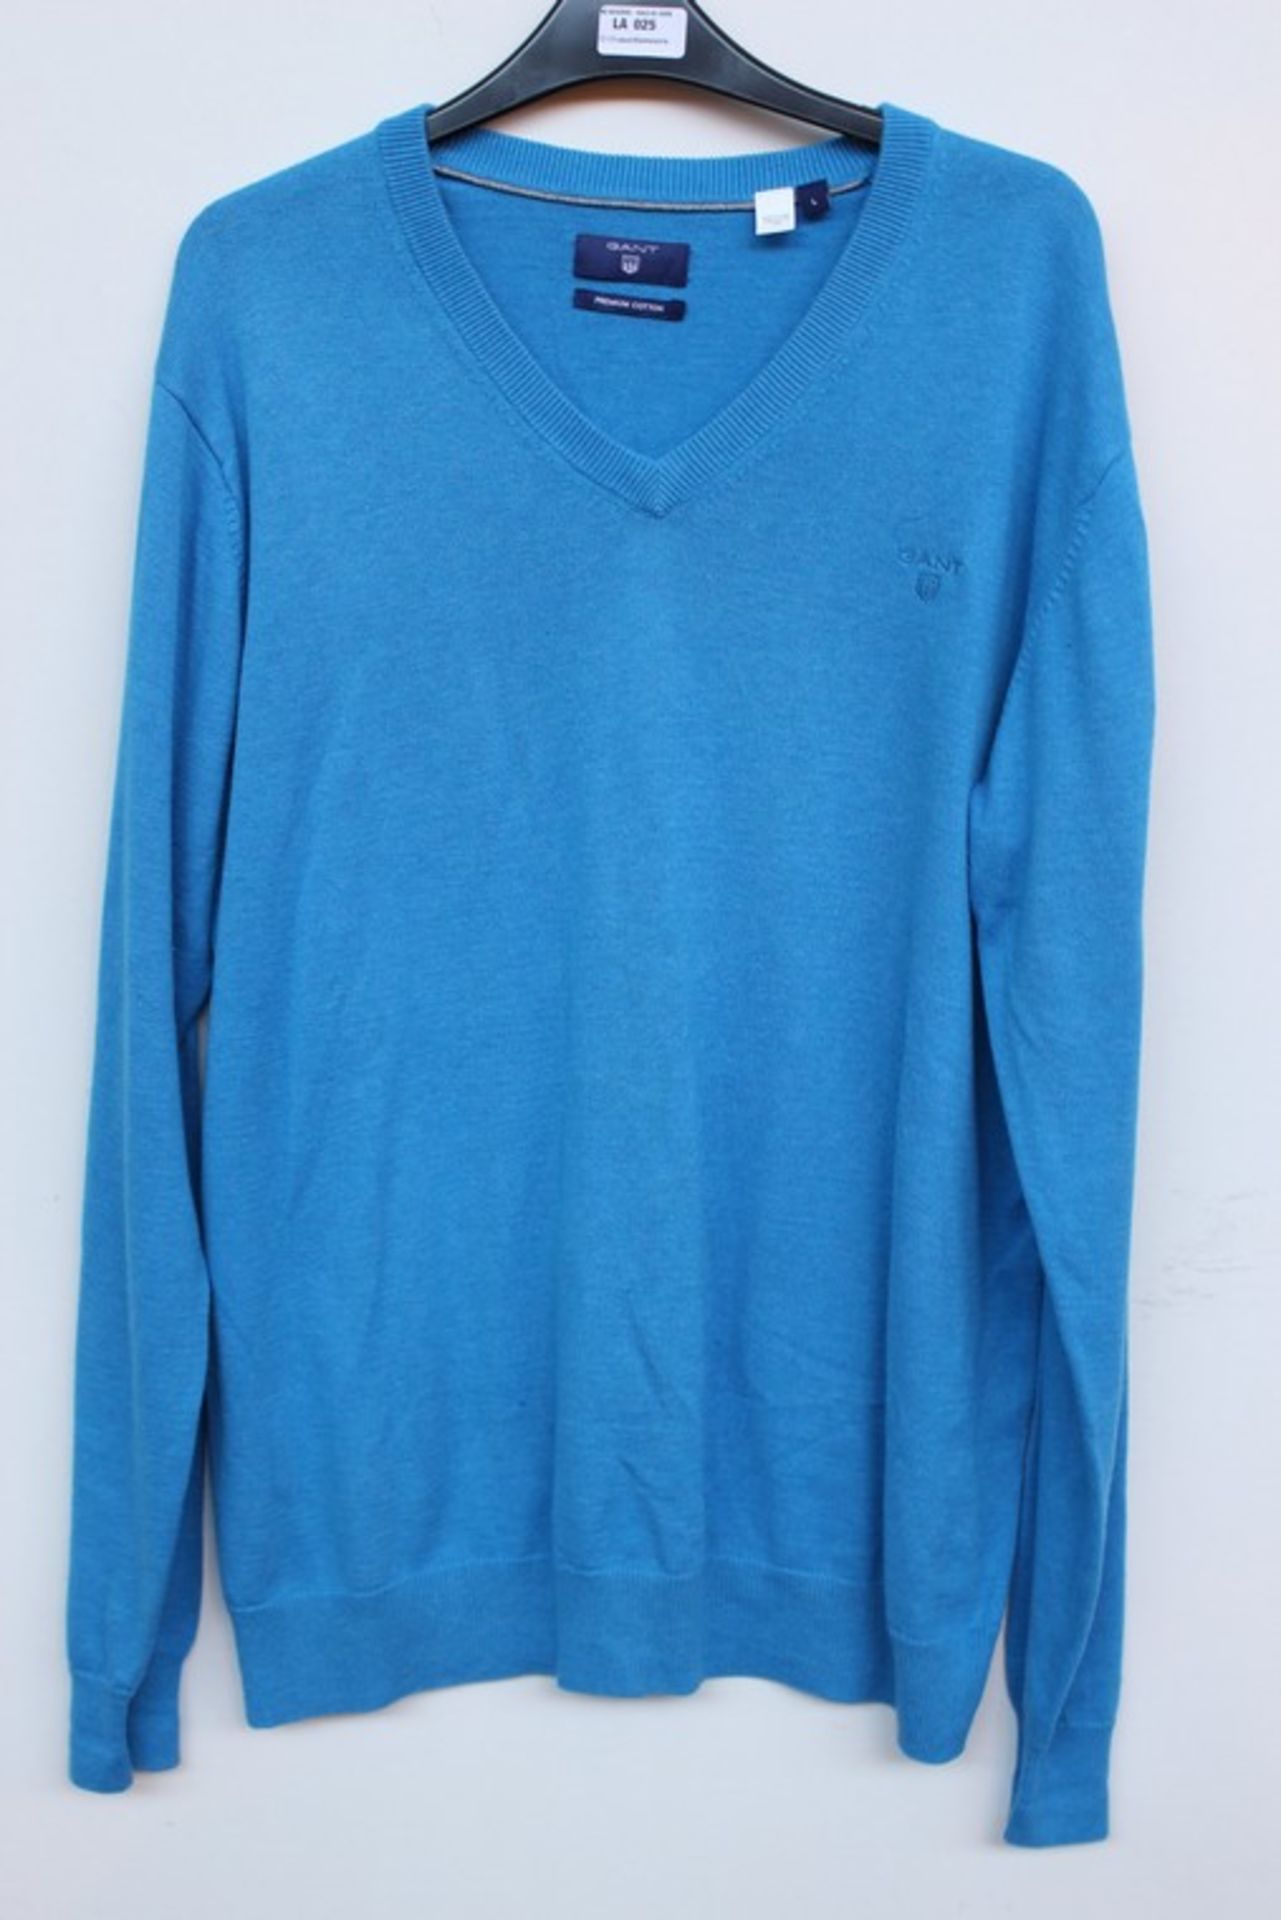 1 x GANT V-NECK JUMPER IN BLUE SIZE XL RRP £100 (16.10.17) *PLEASE NOTE THAT THE BID PRICE IS